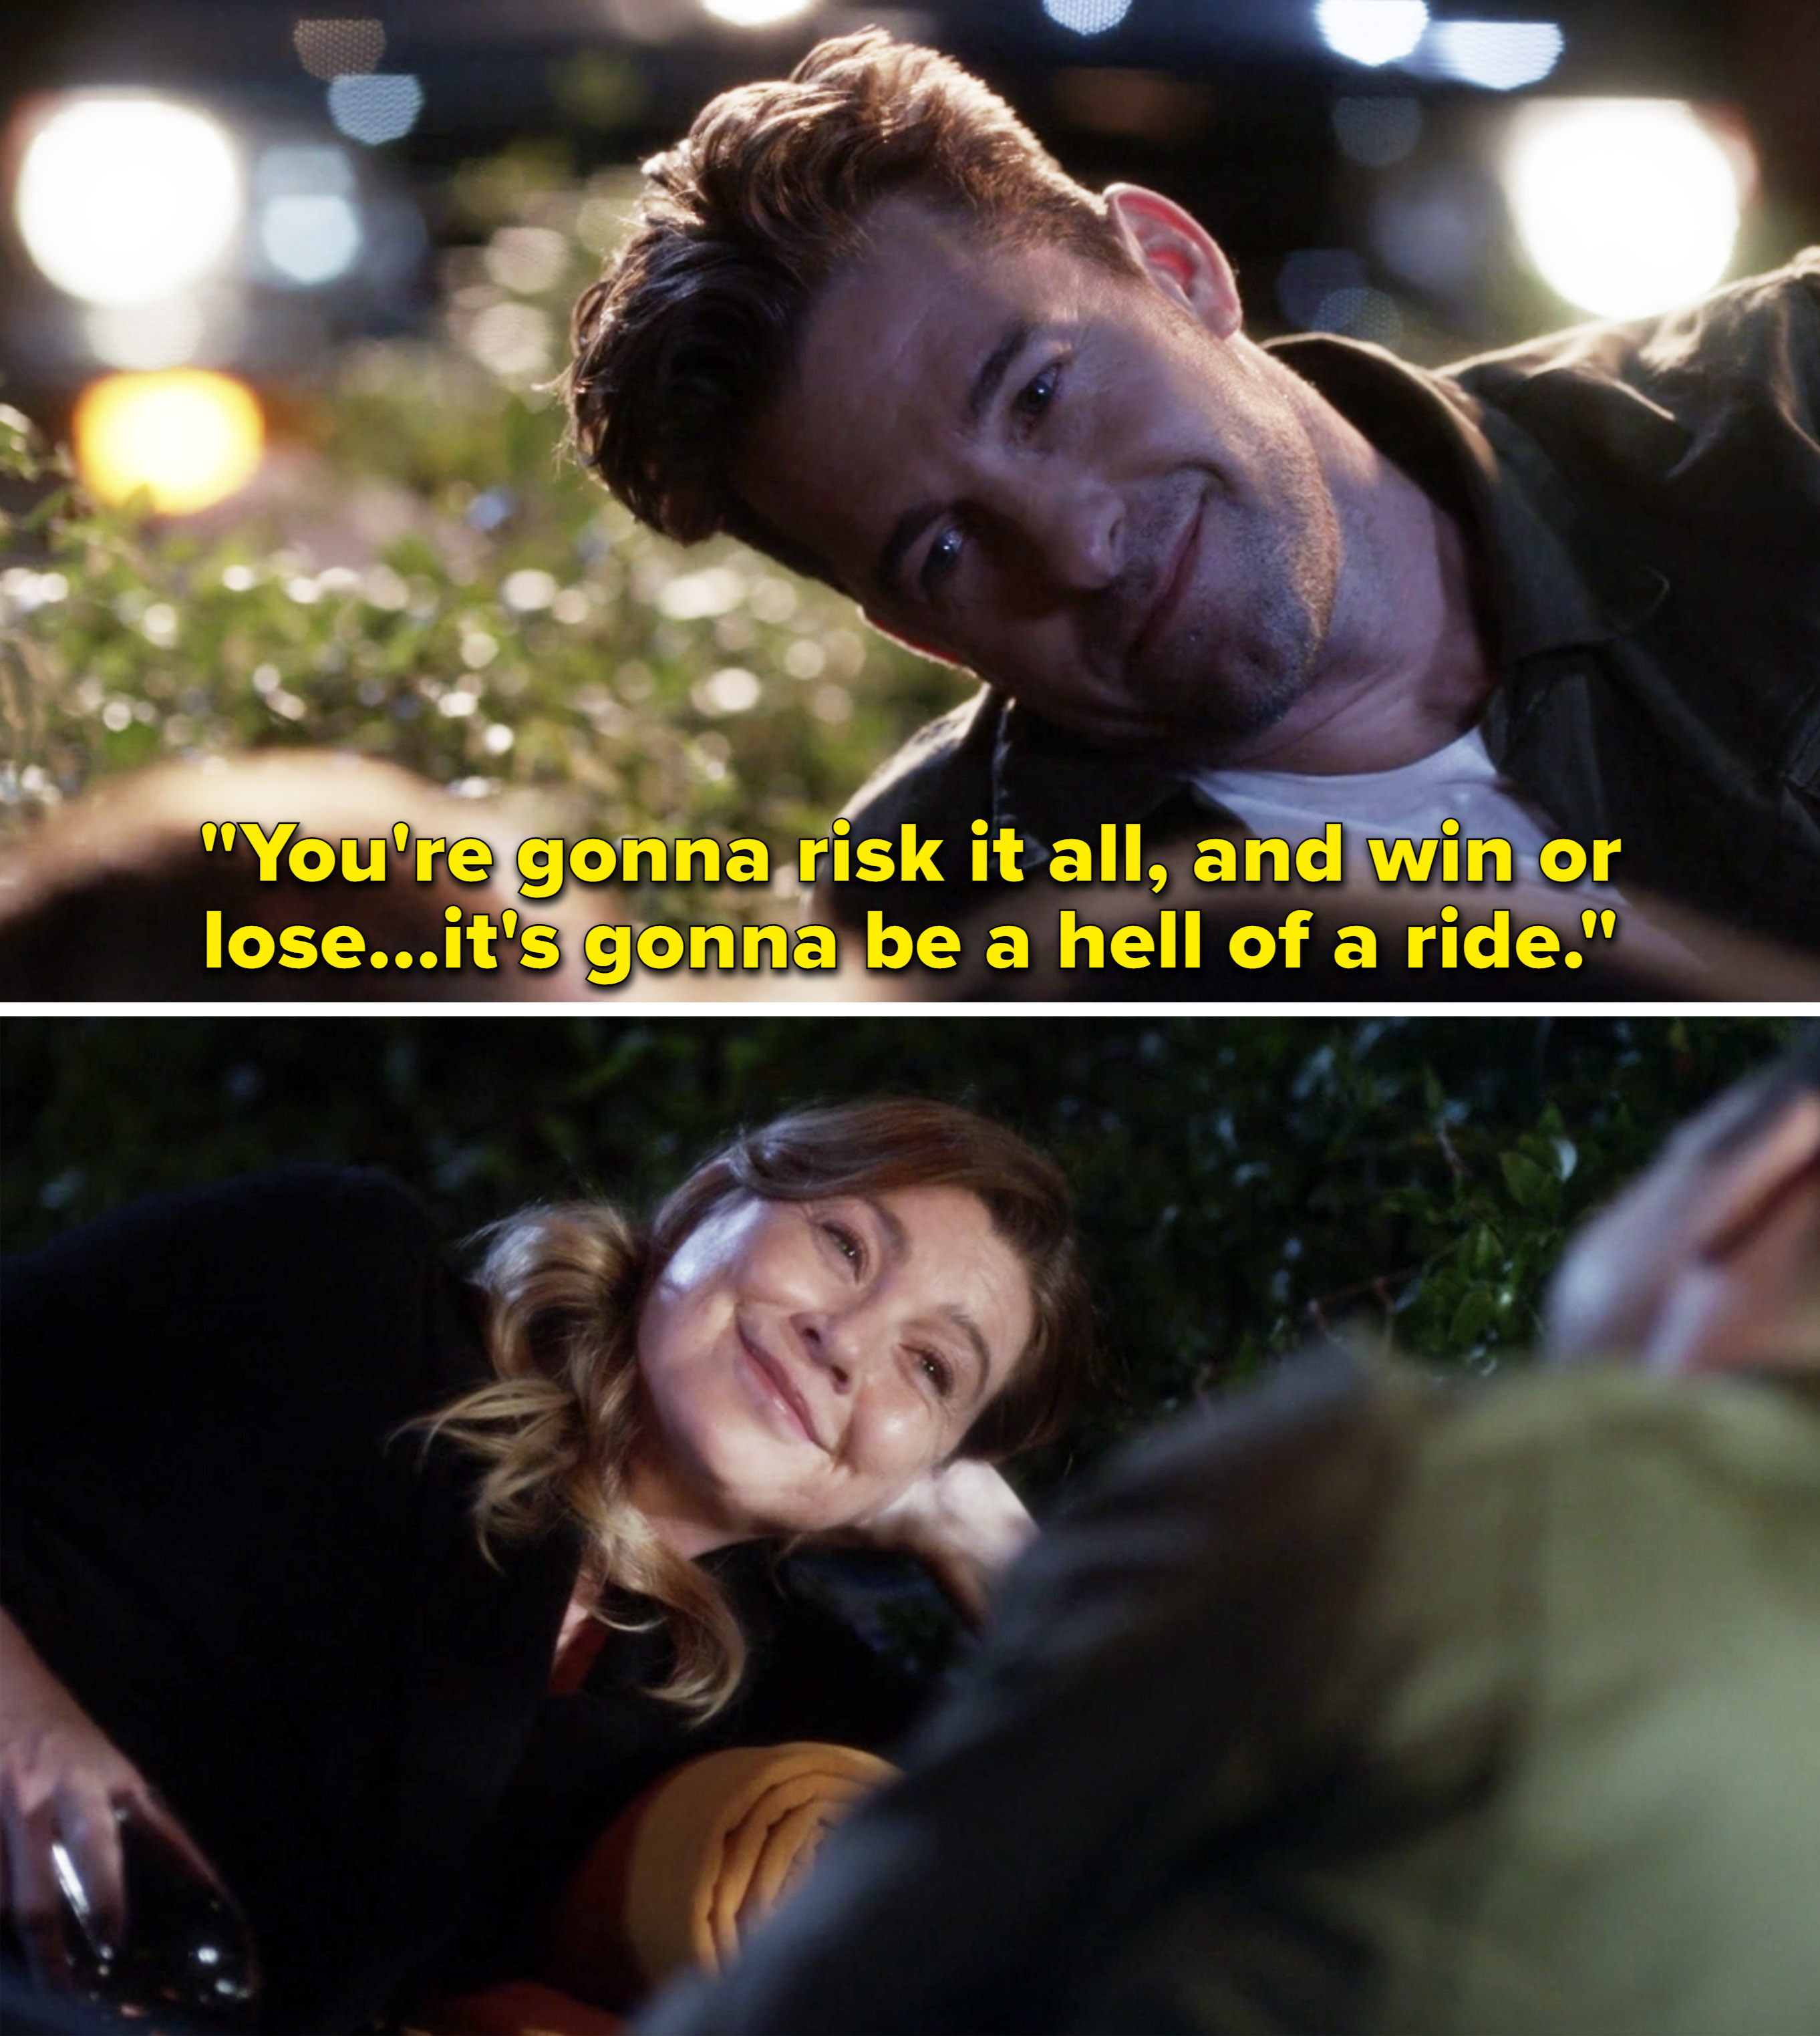 Nick telling Meredith, &quot;You&#x27;re gonna risk it all, and win or lose, it&#x27;s gonna be a hell of a ride&quot;